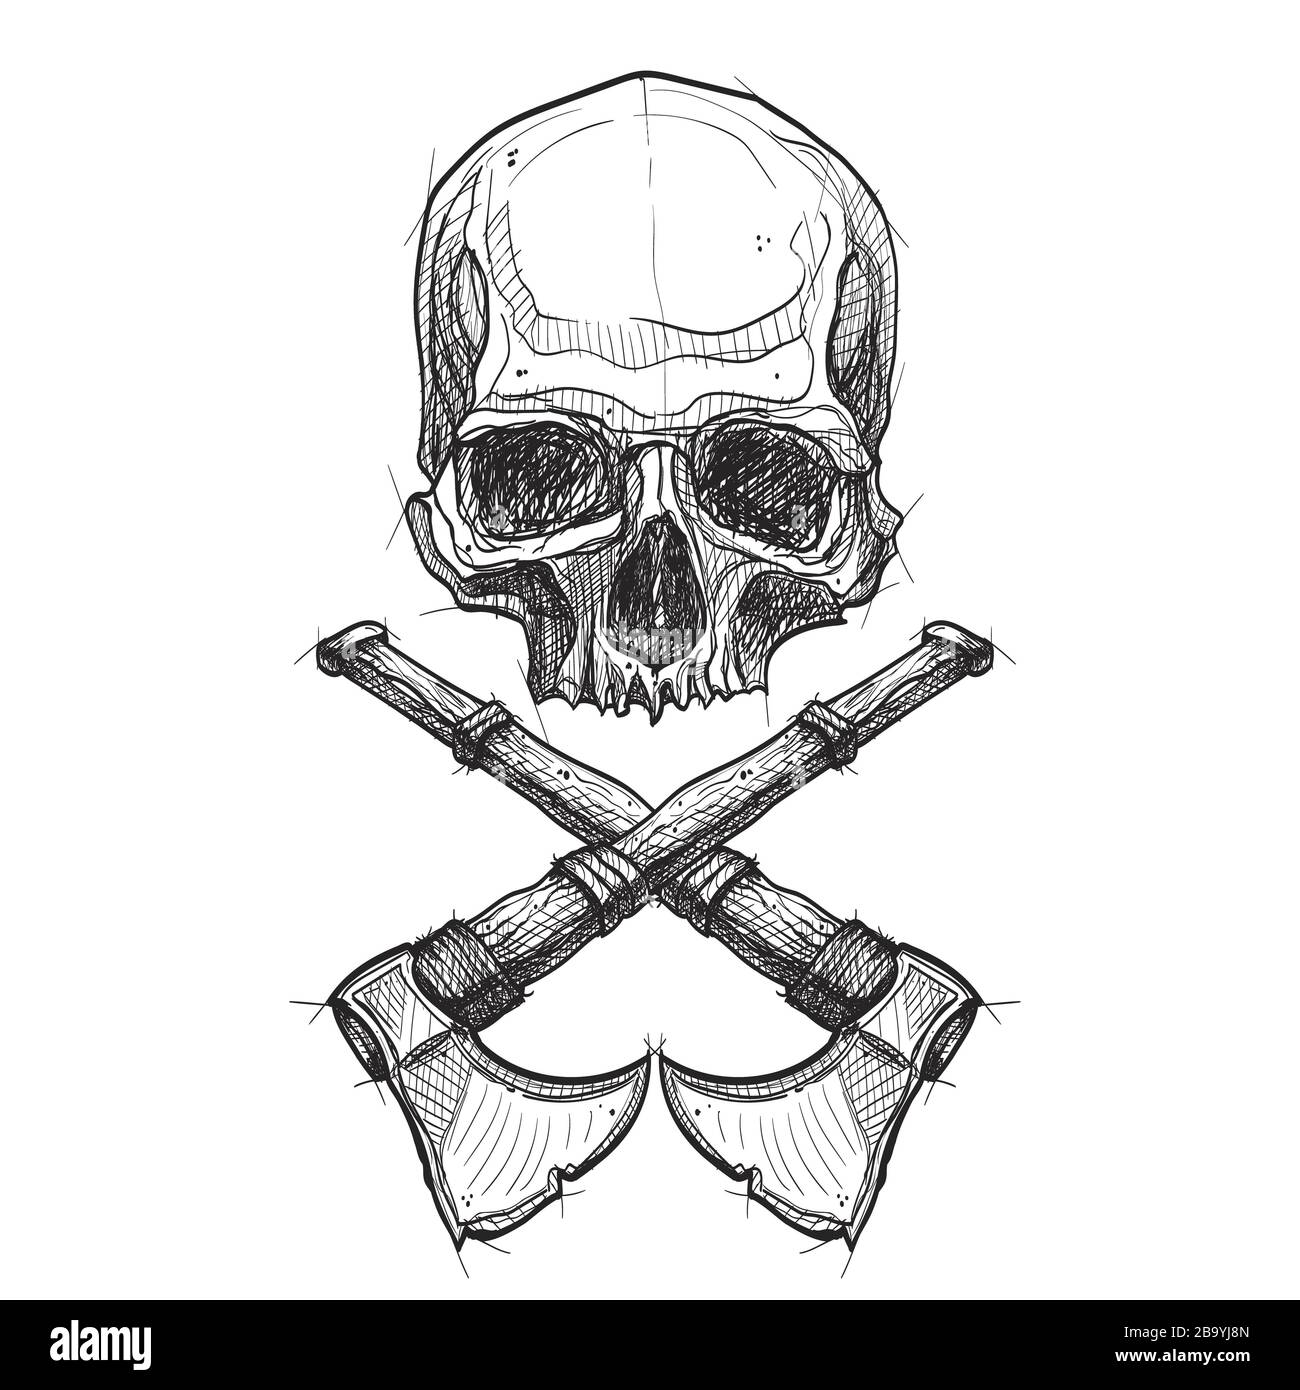 Skull with axes in sketch style Stock Photo